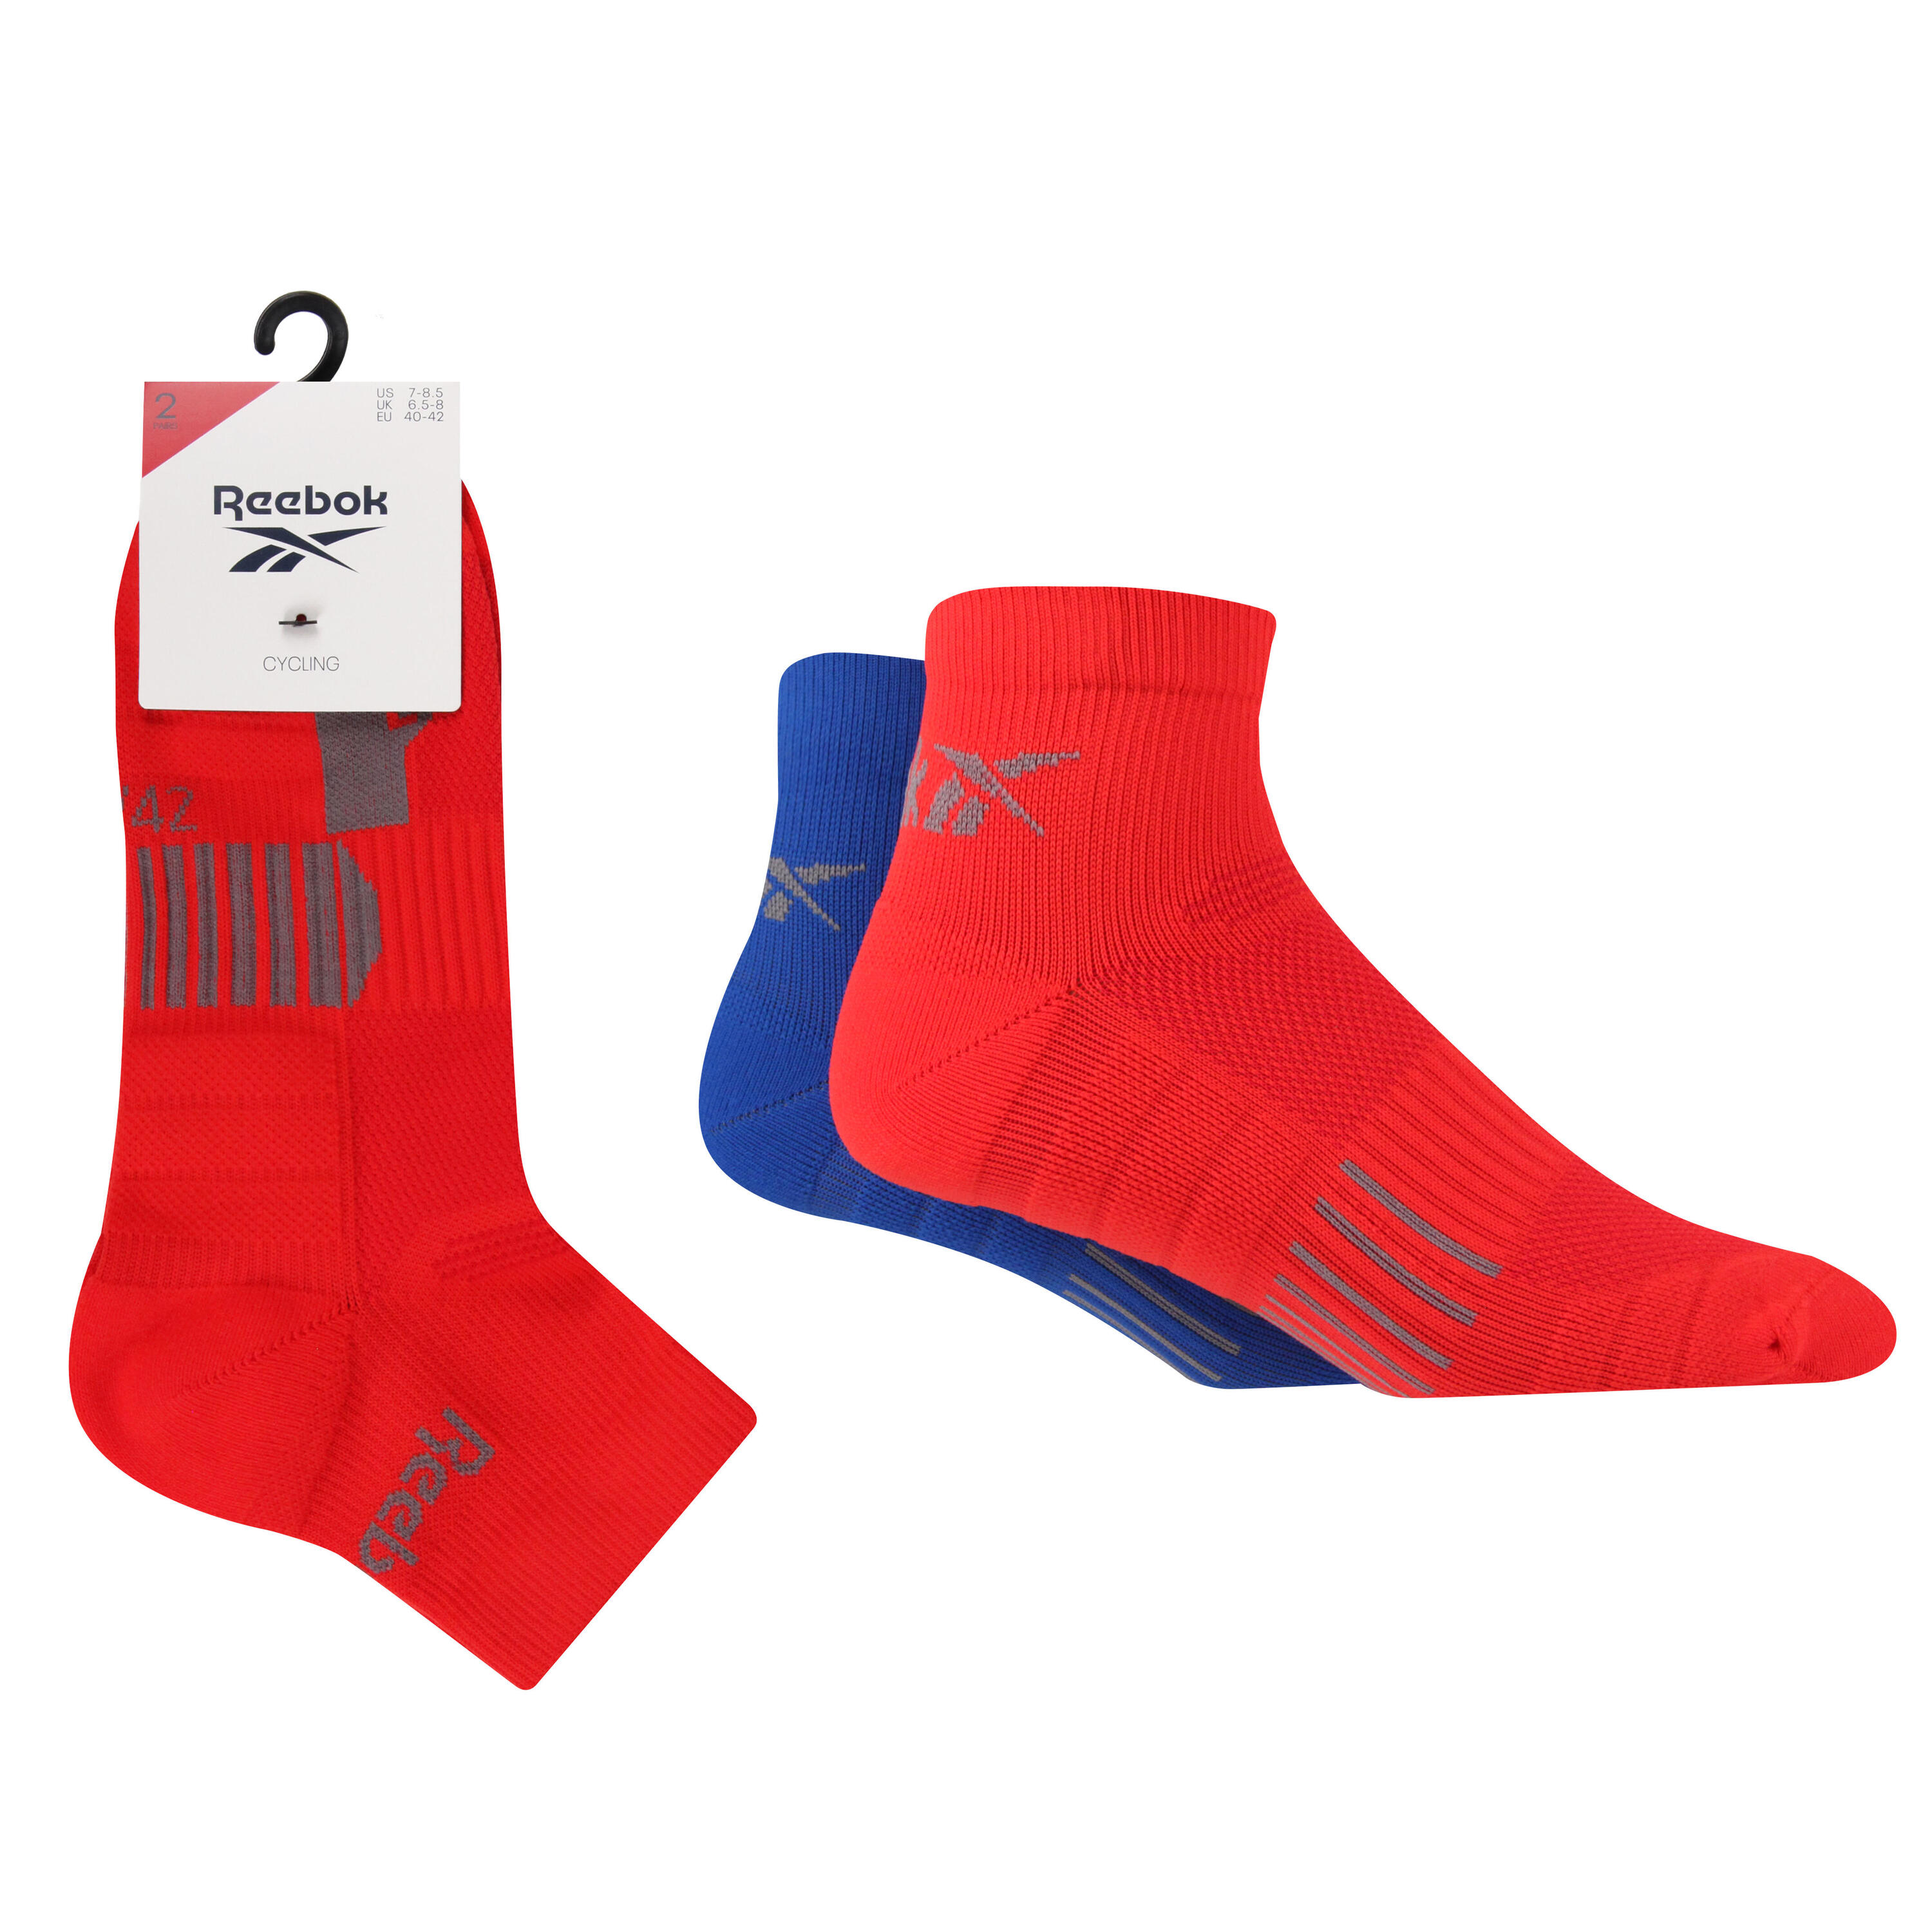 REEBOK 2 Pair Pack Cycling Socks With Full Elastic Compession and Arch Support